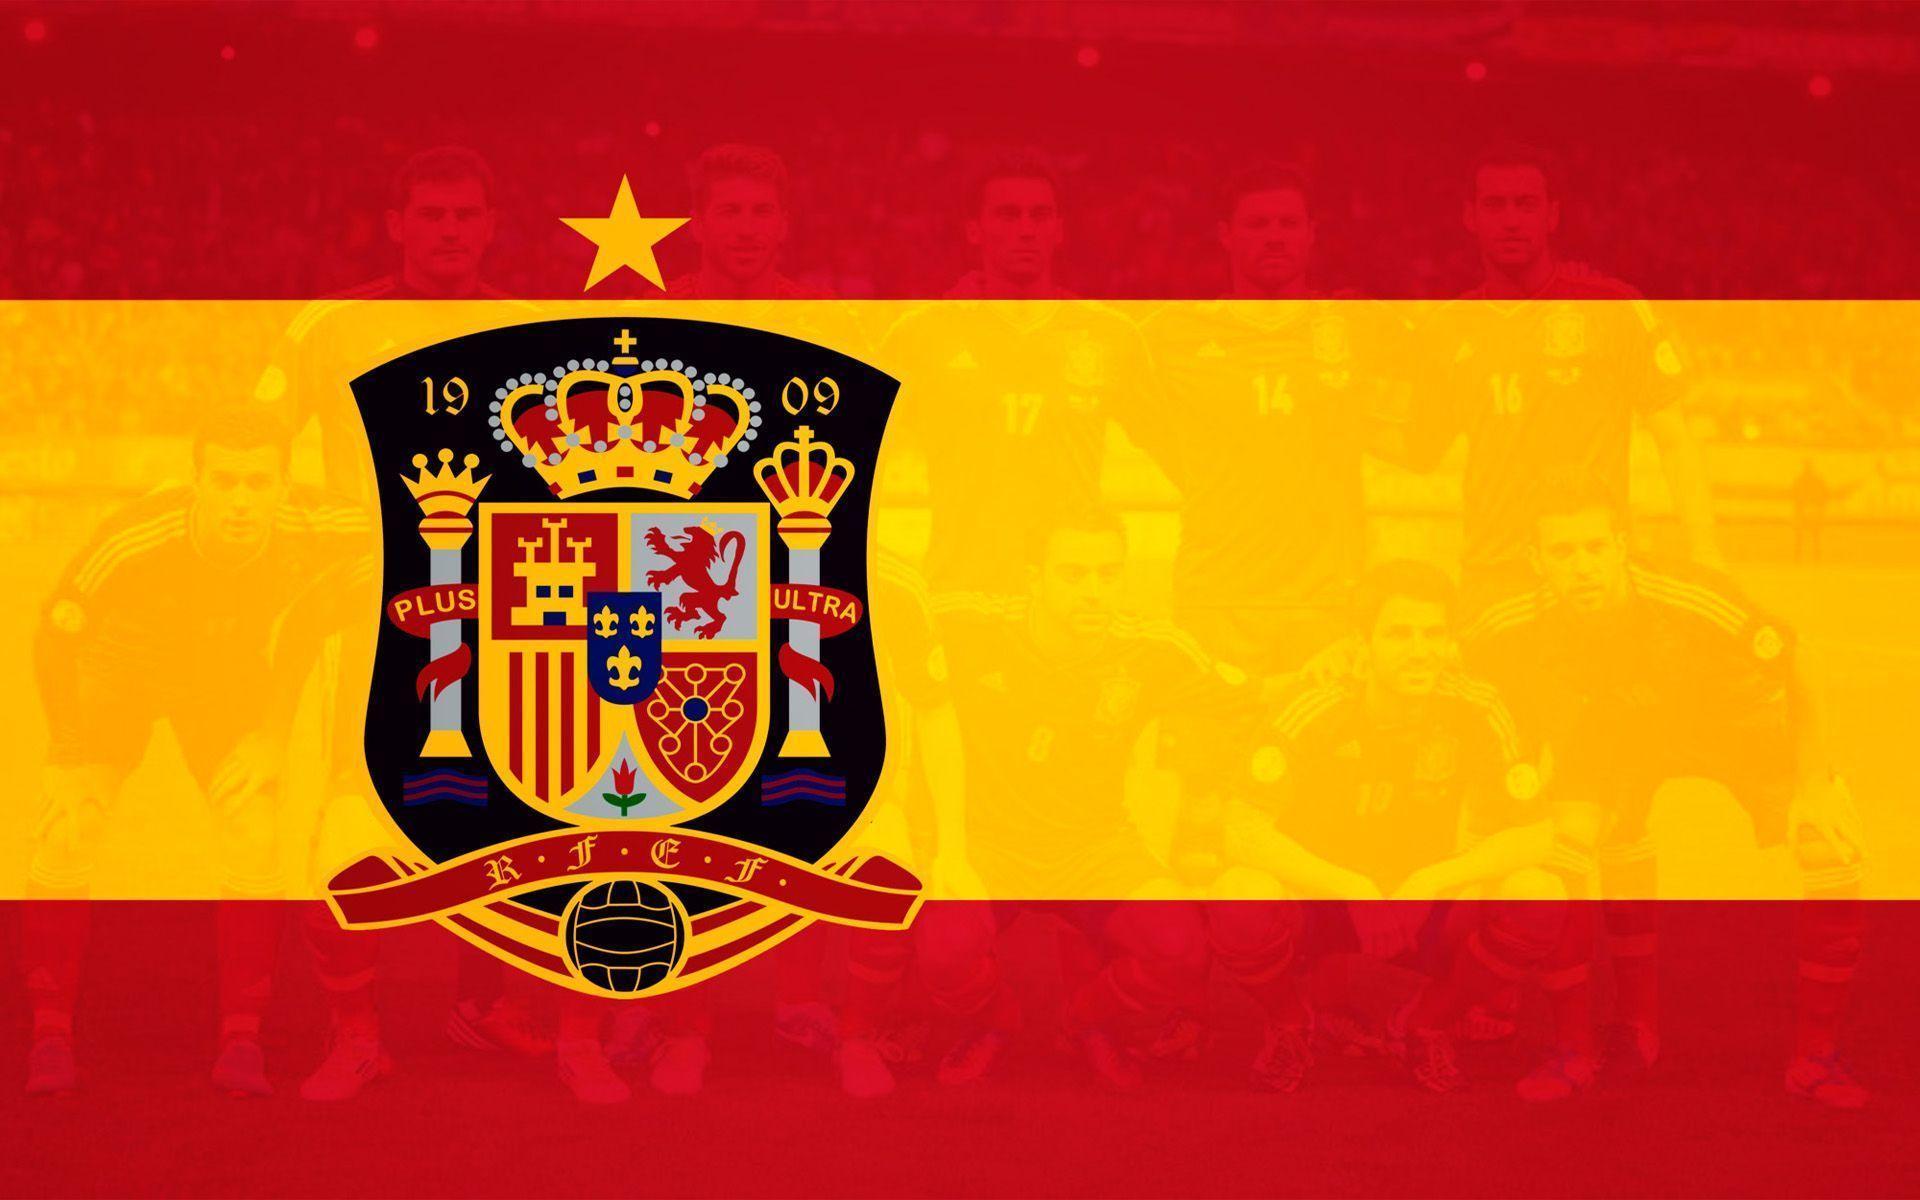 Spain National Team Wallpapers 2016 - Wallpaper Cave